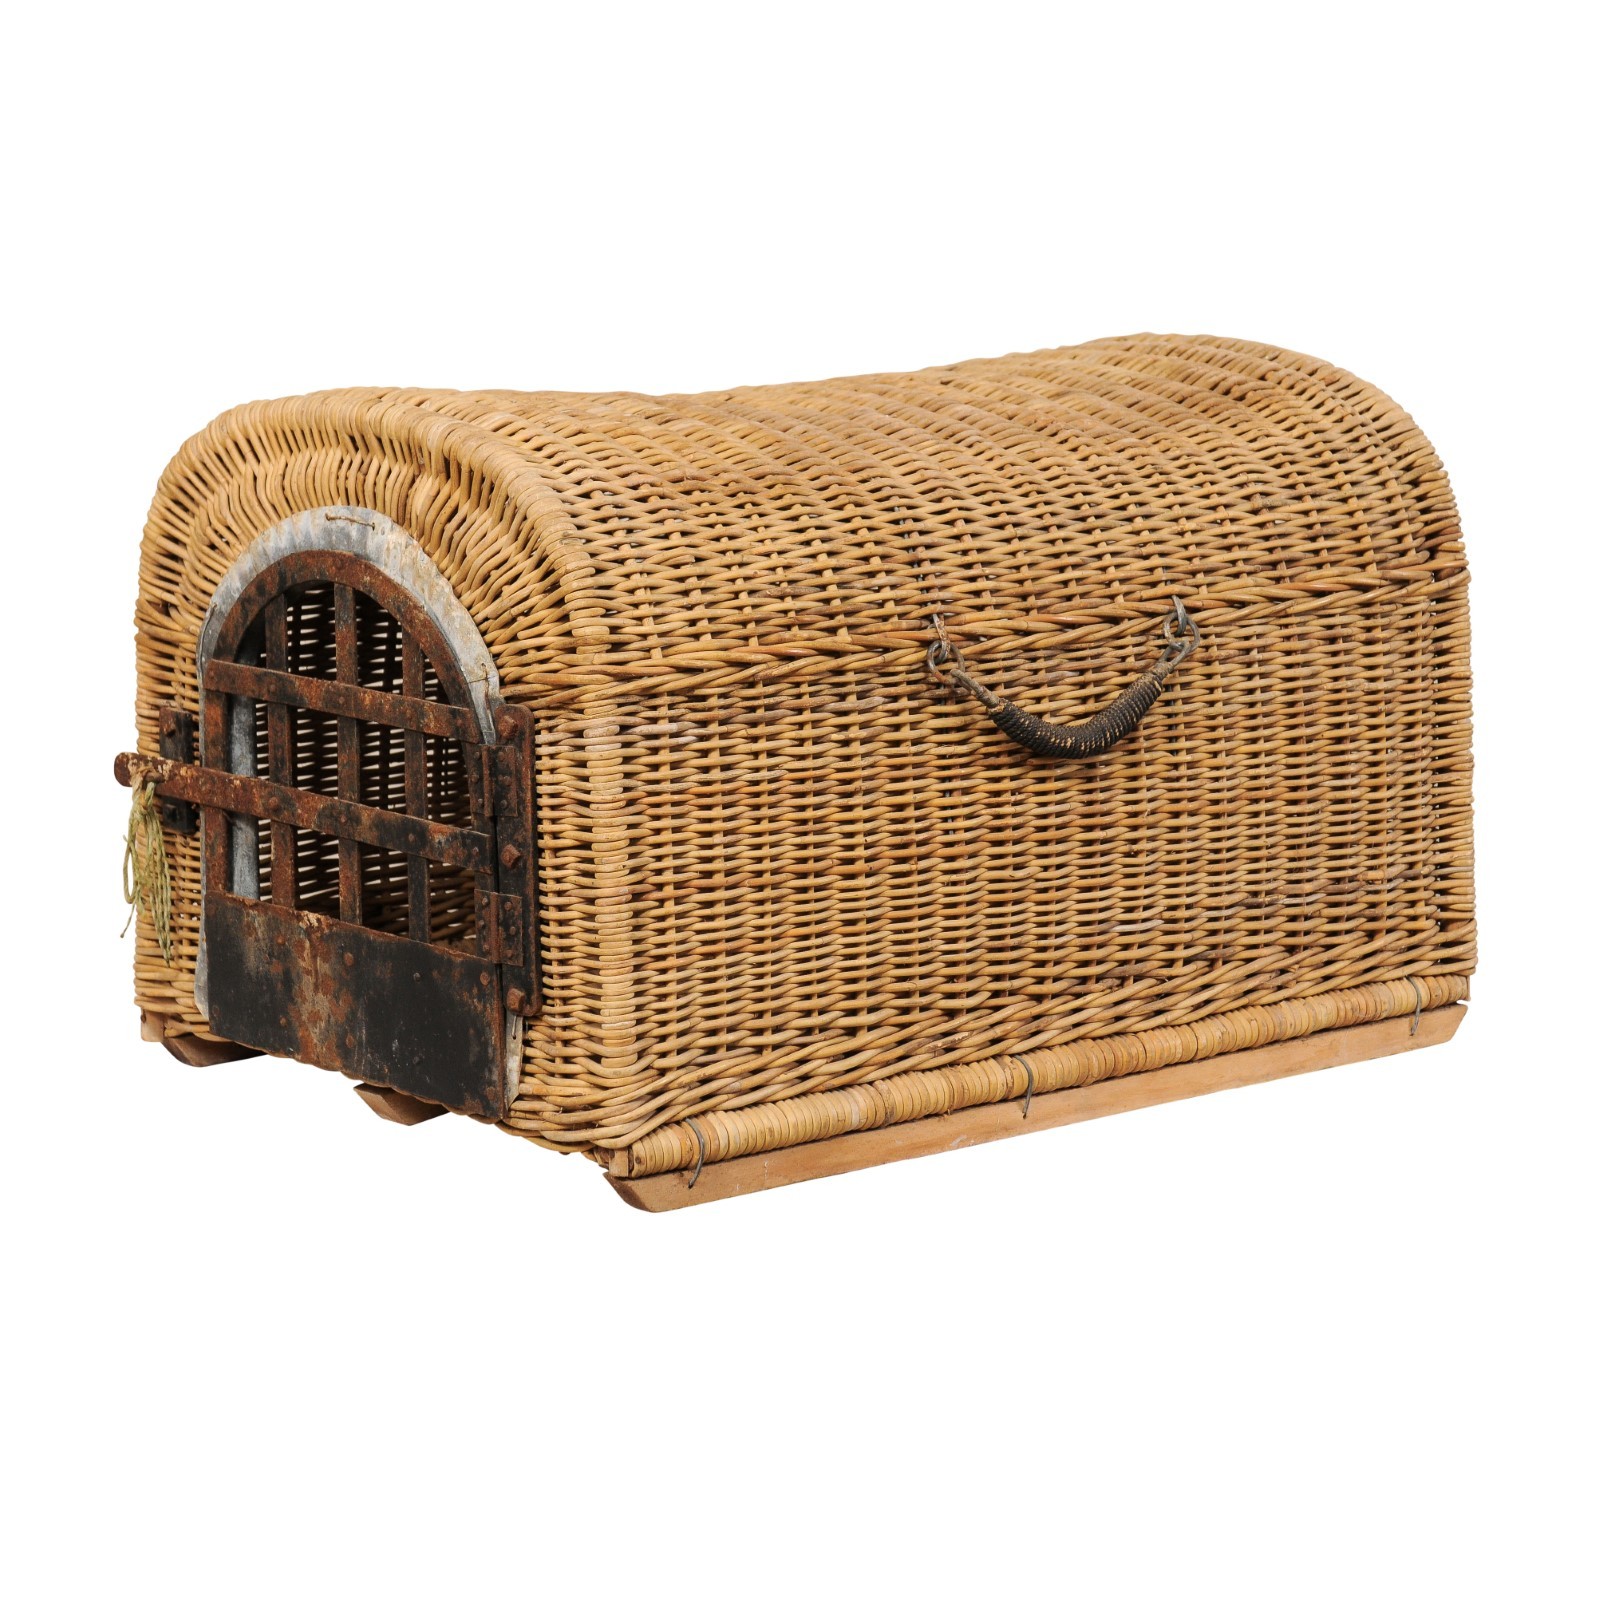 English Wicker & Iron Pet Crate or Bed